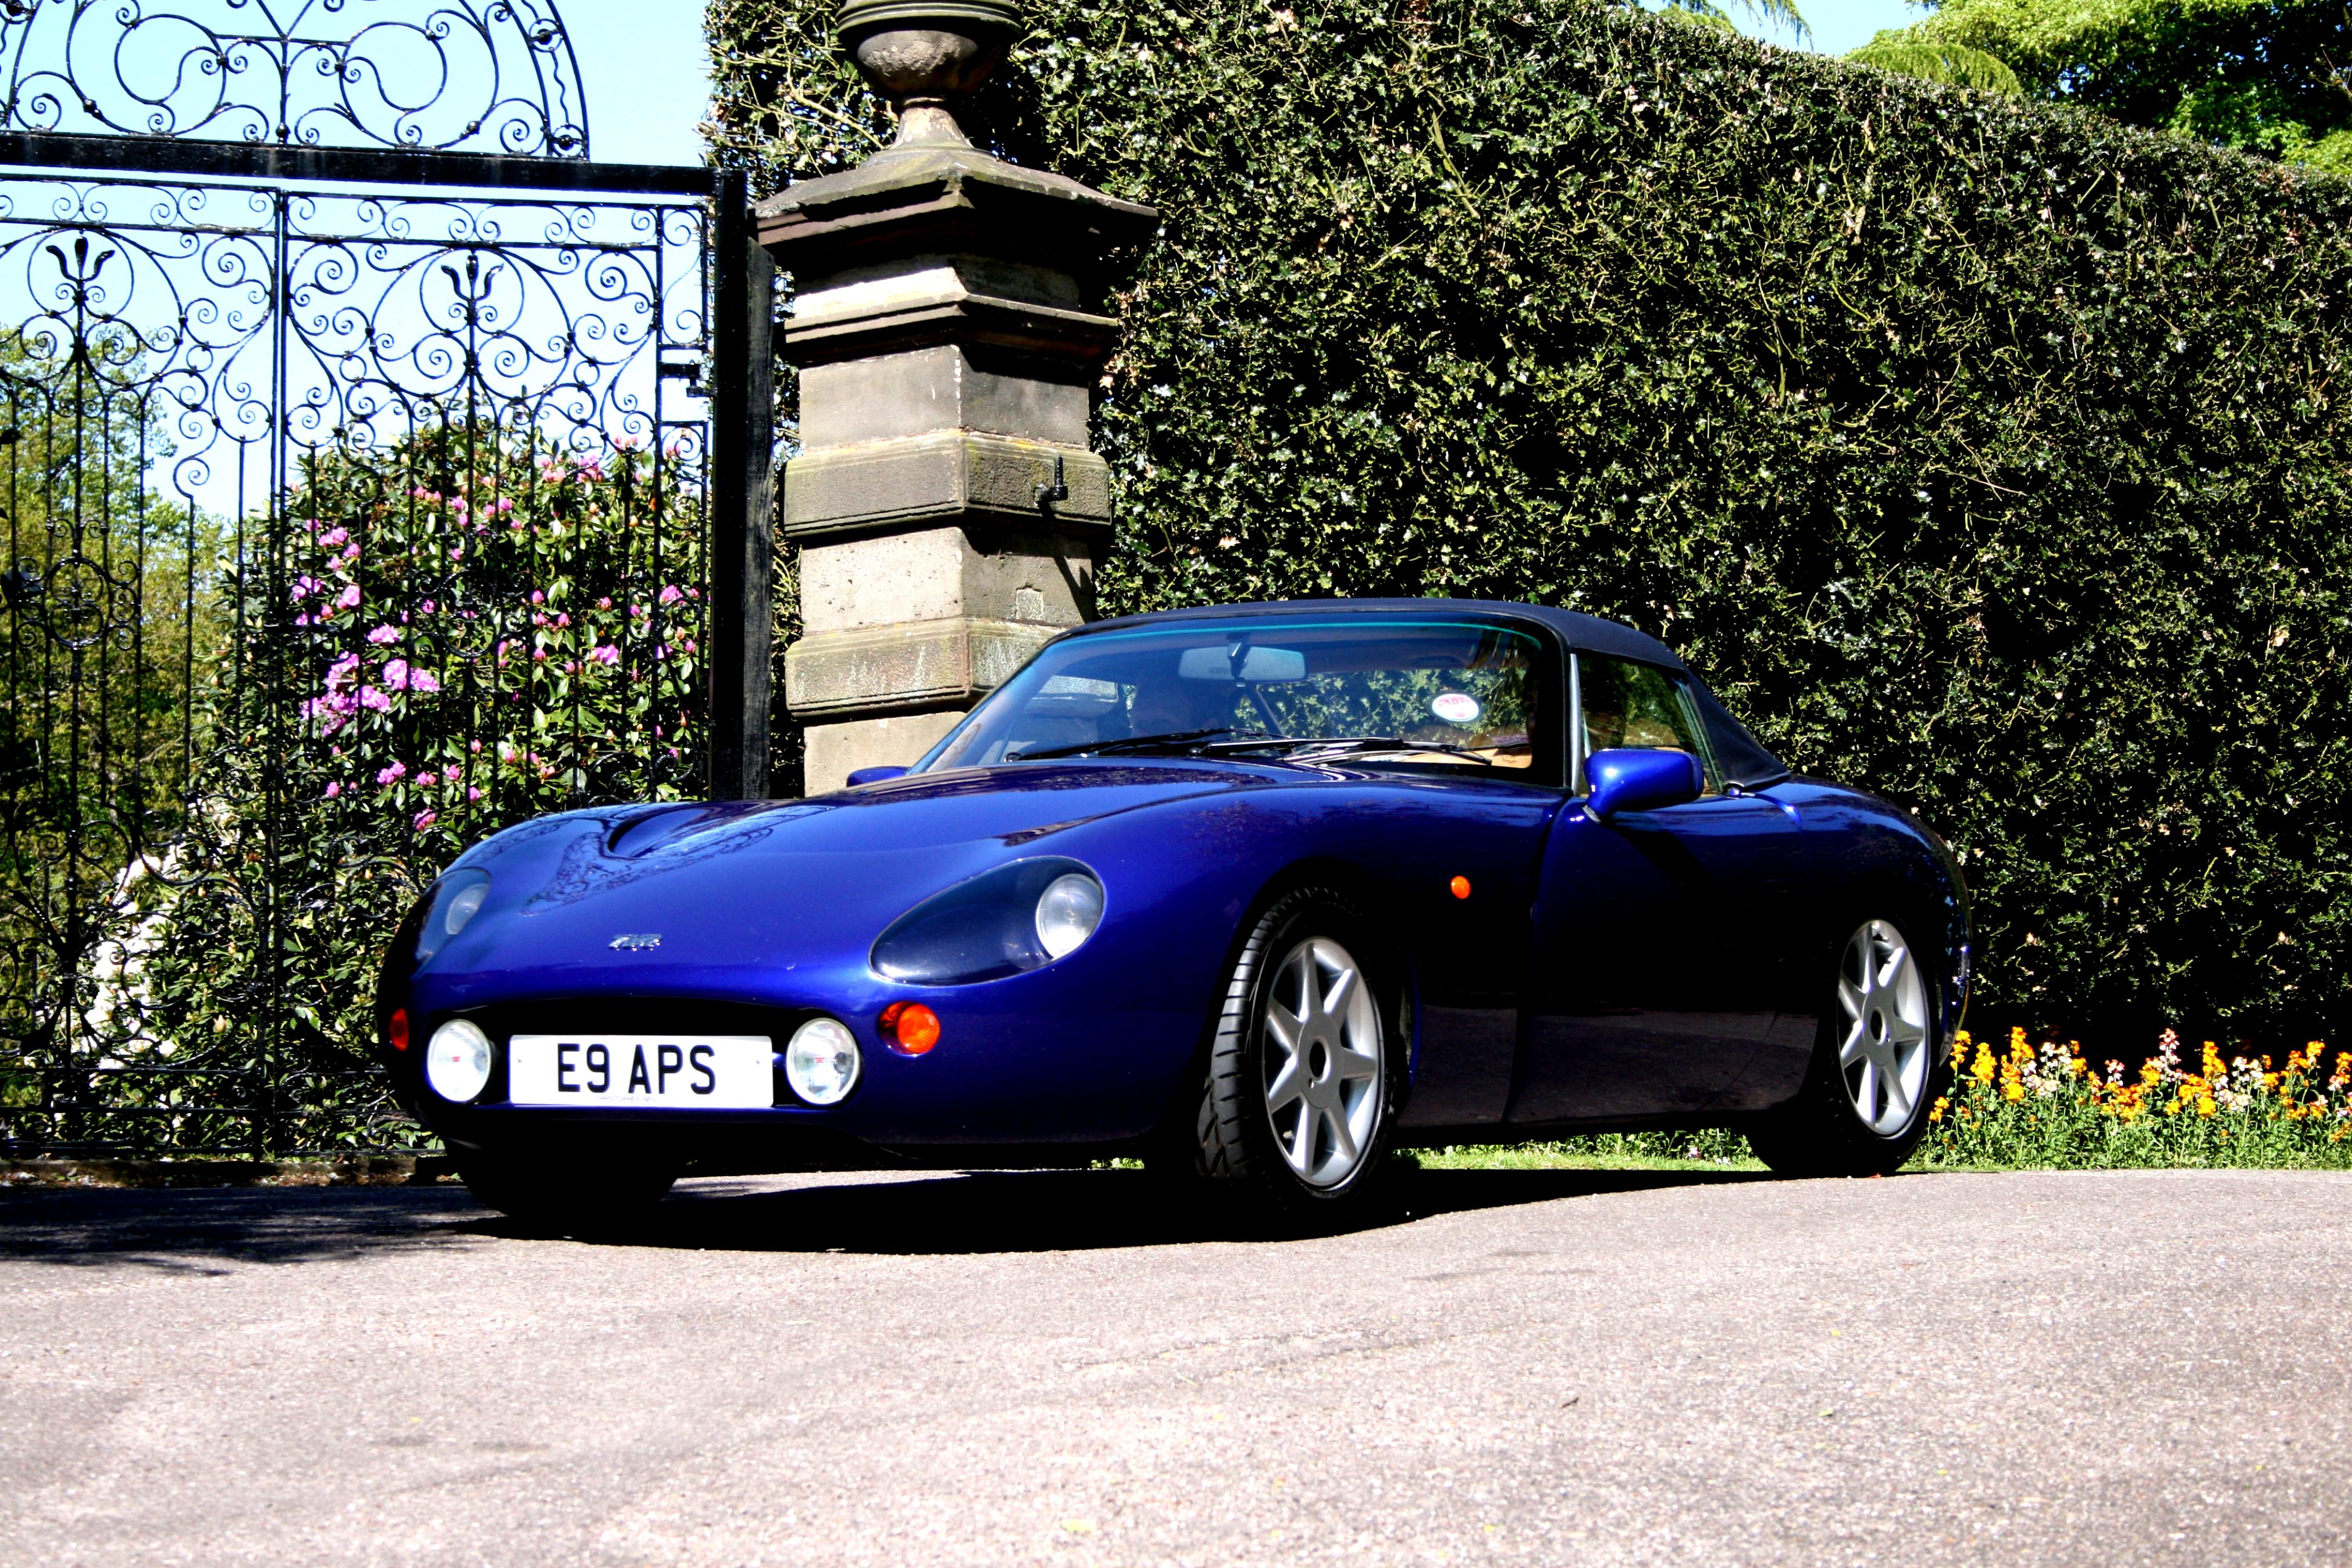 TVR Griffith 1992 #31